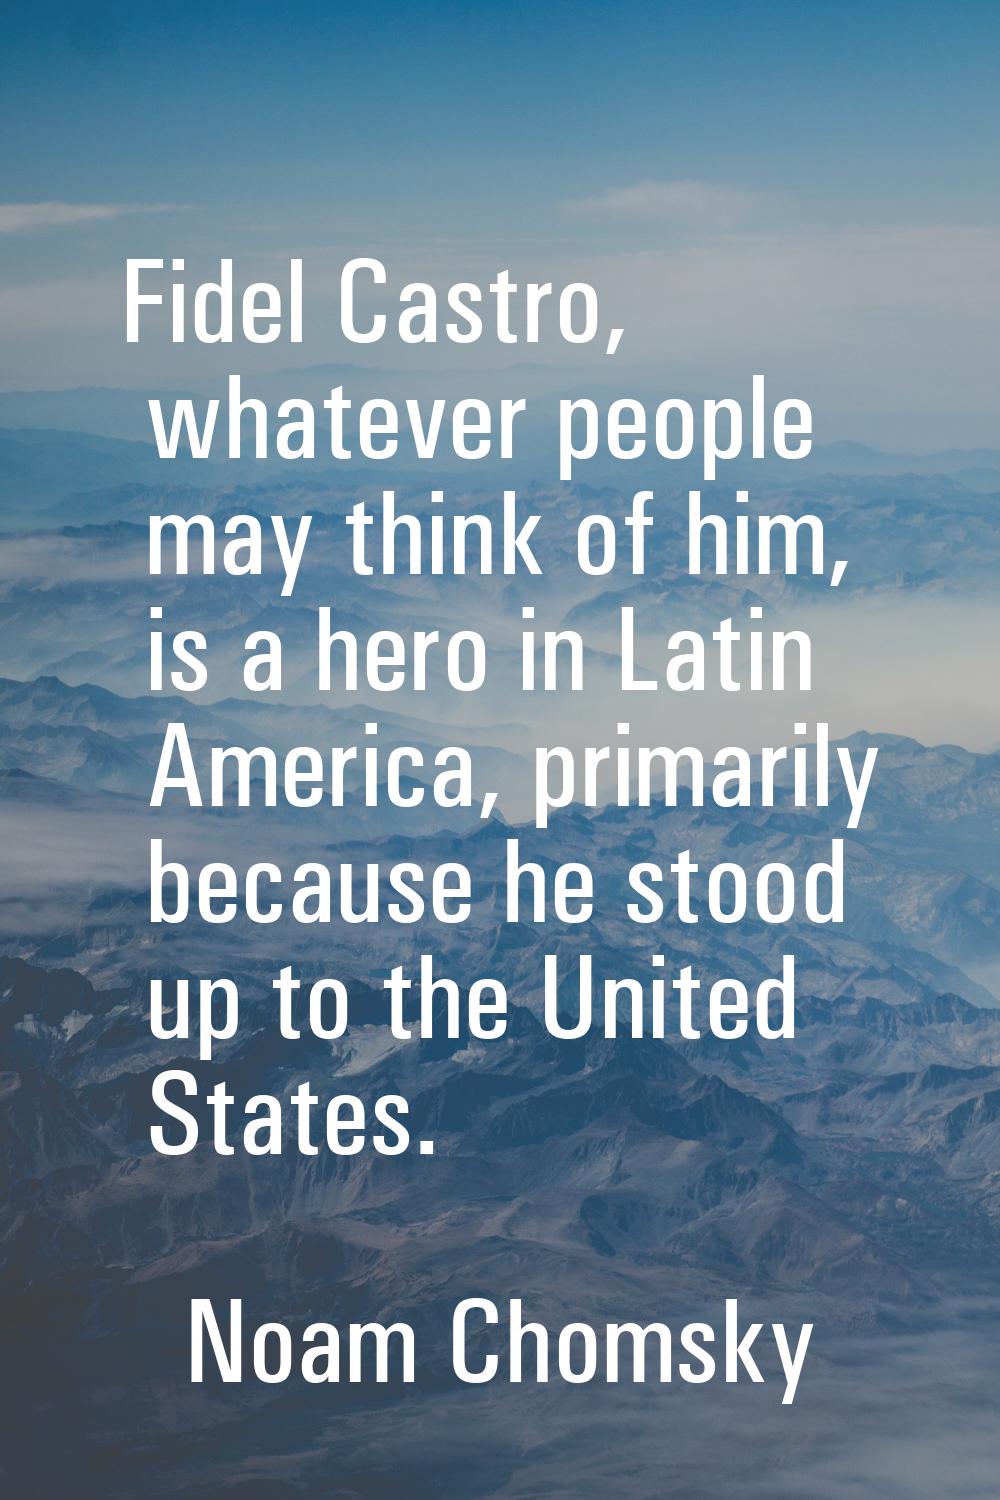 Fidel Castro, whatever people may think of him, is a hero in Latin America, primarily because he st